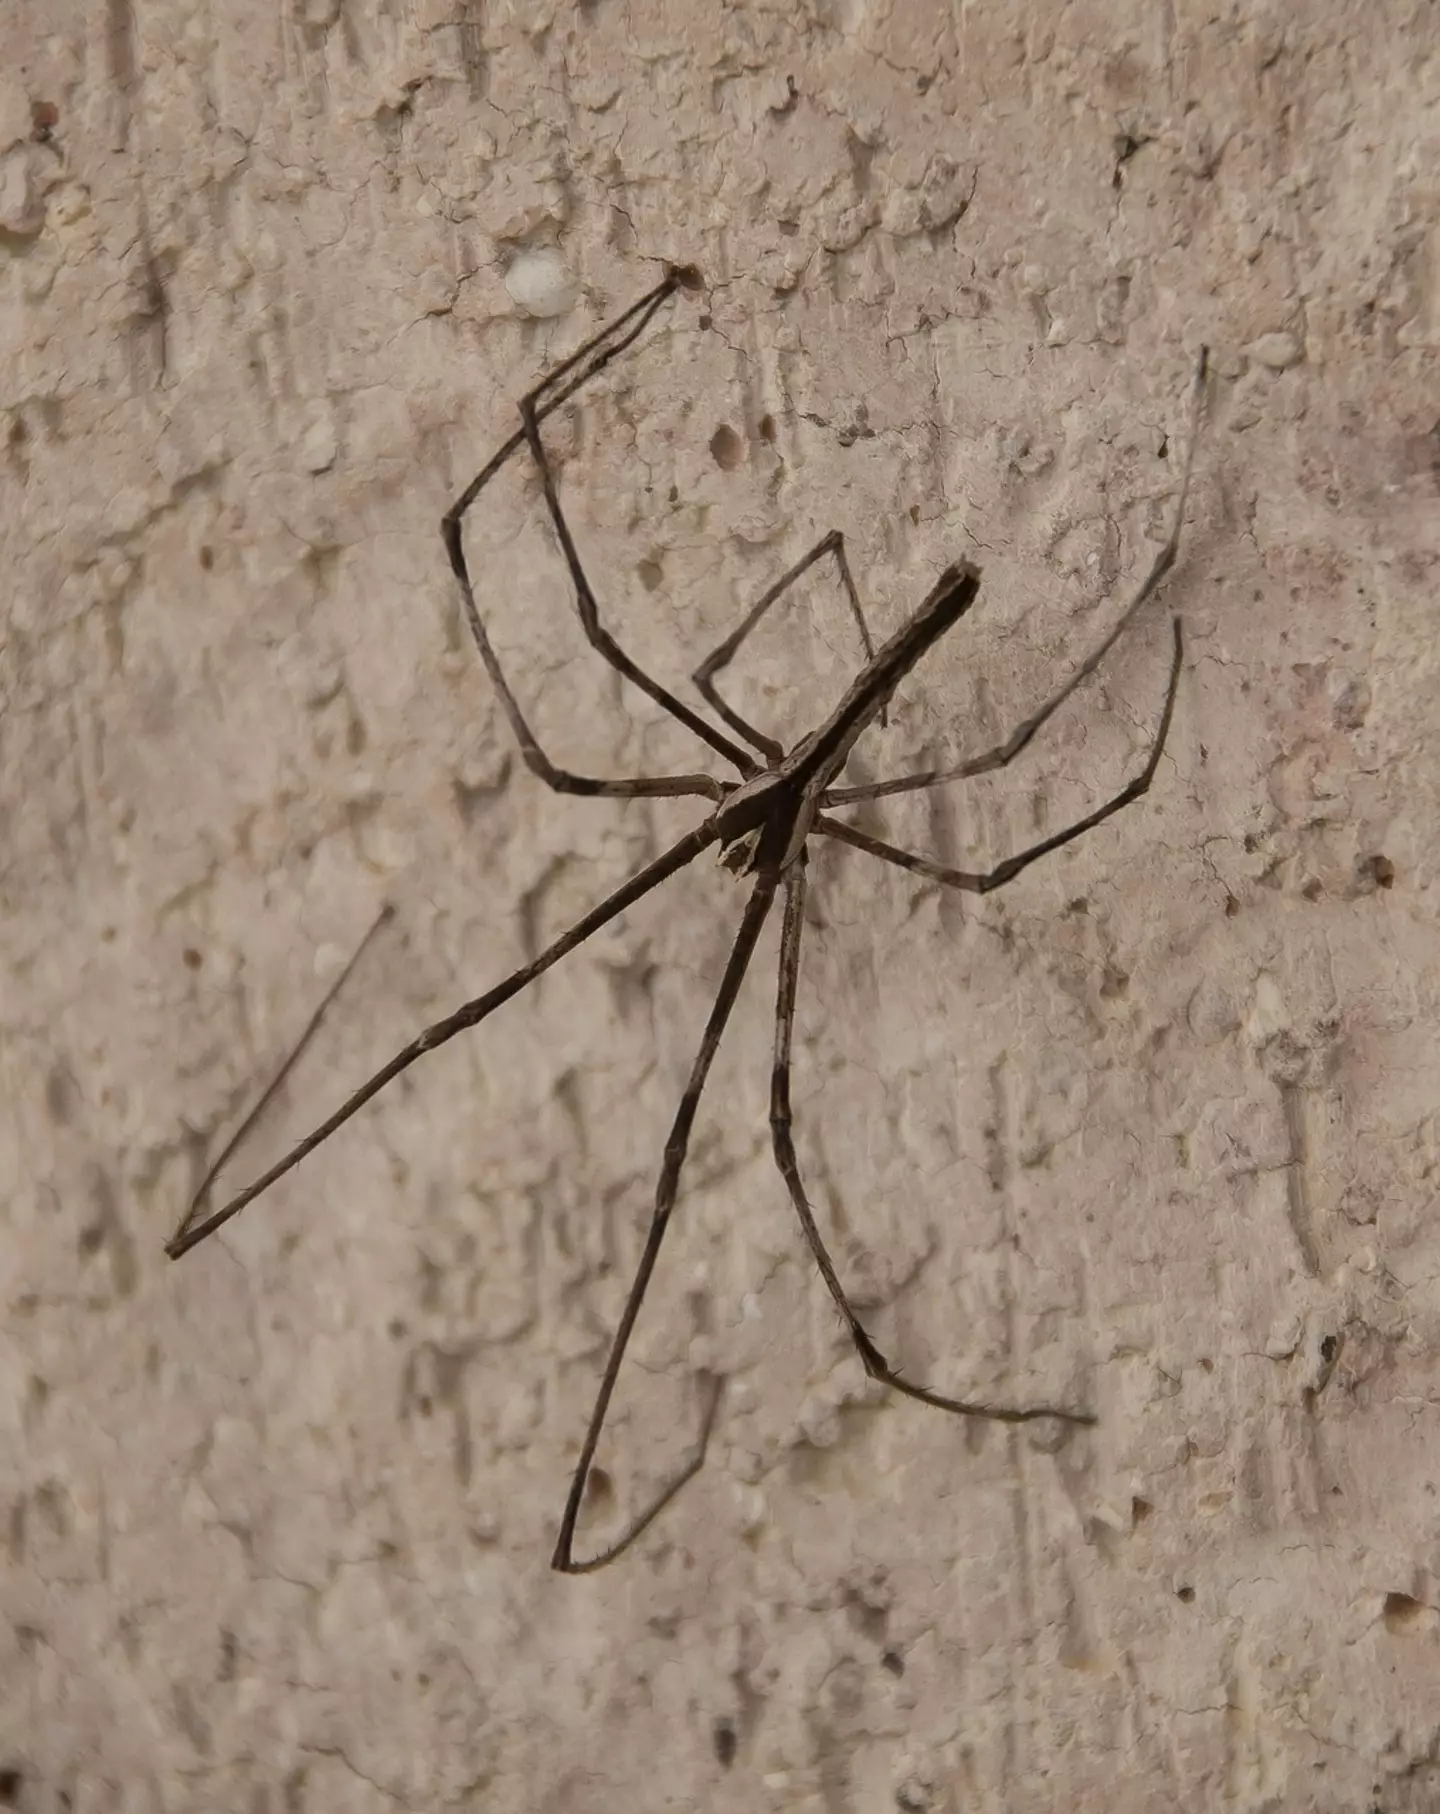 Giant spiders enter our homes each September looking for a mate.